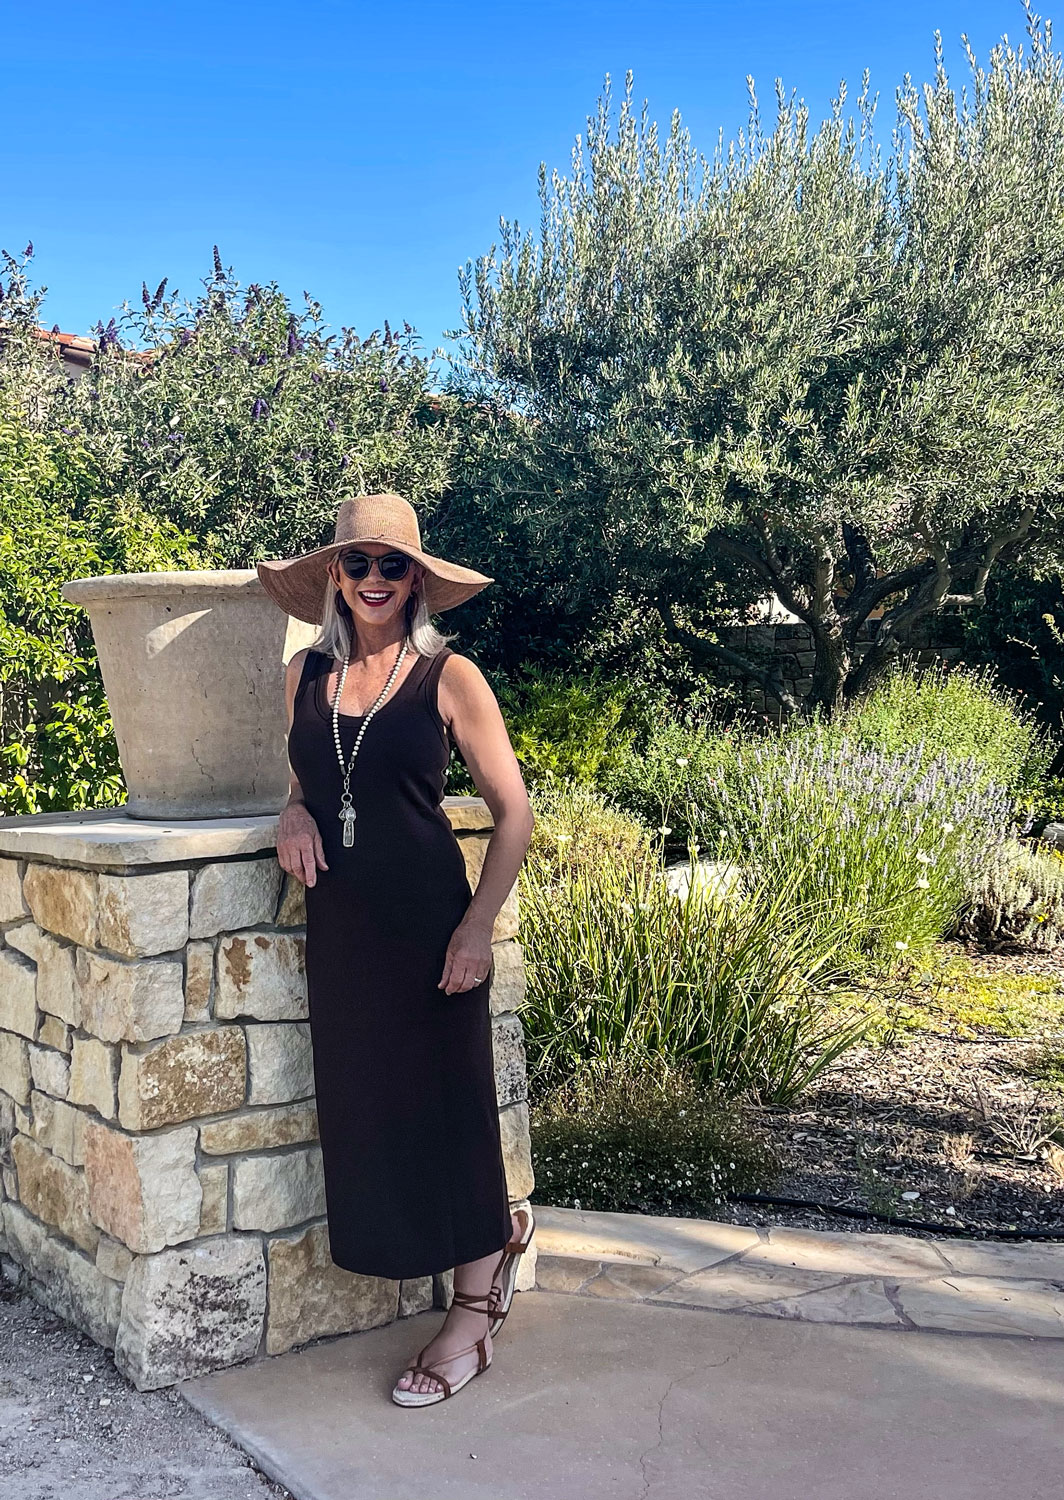 over 50 style blogger cindy hattersley in BR factory knit dress